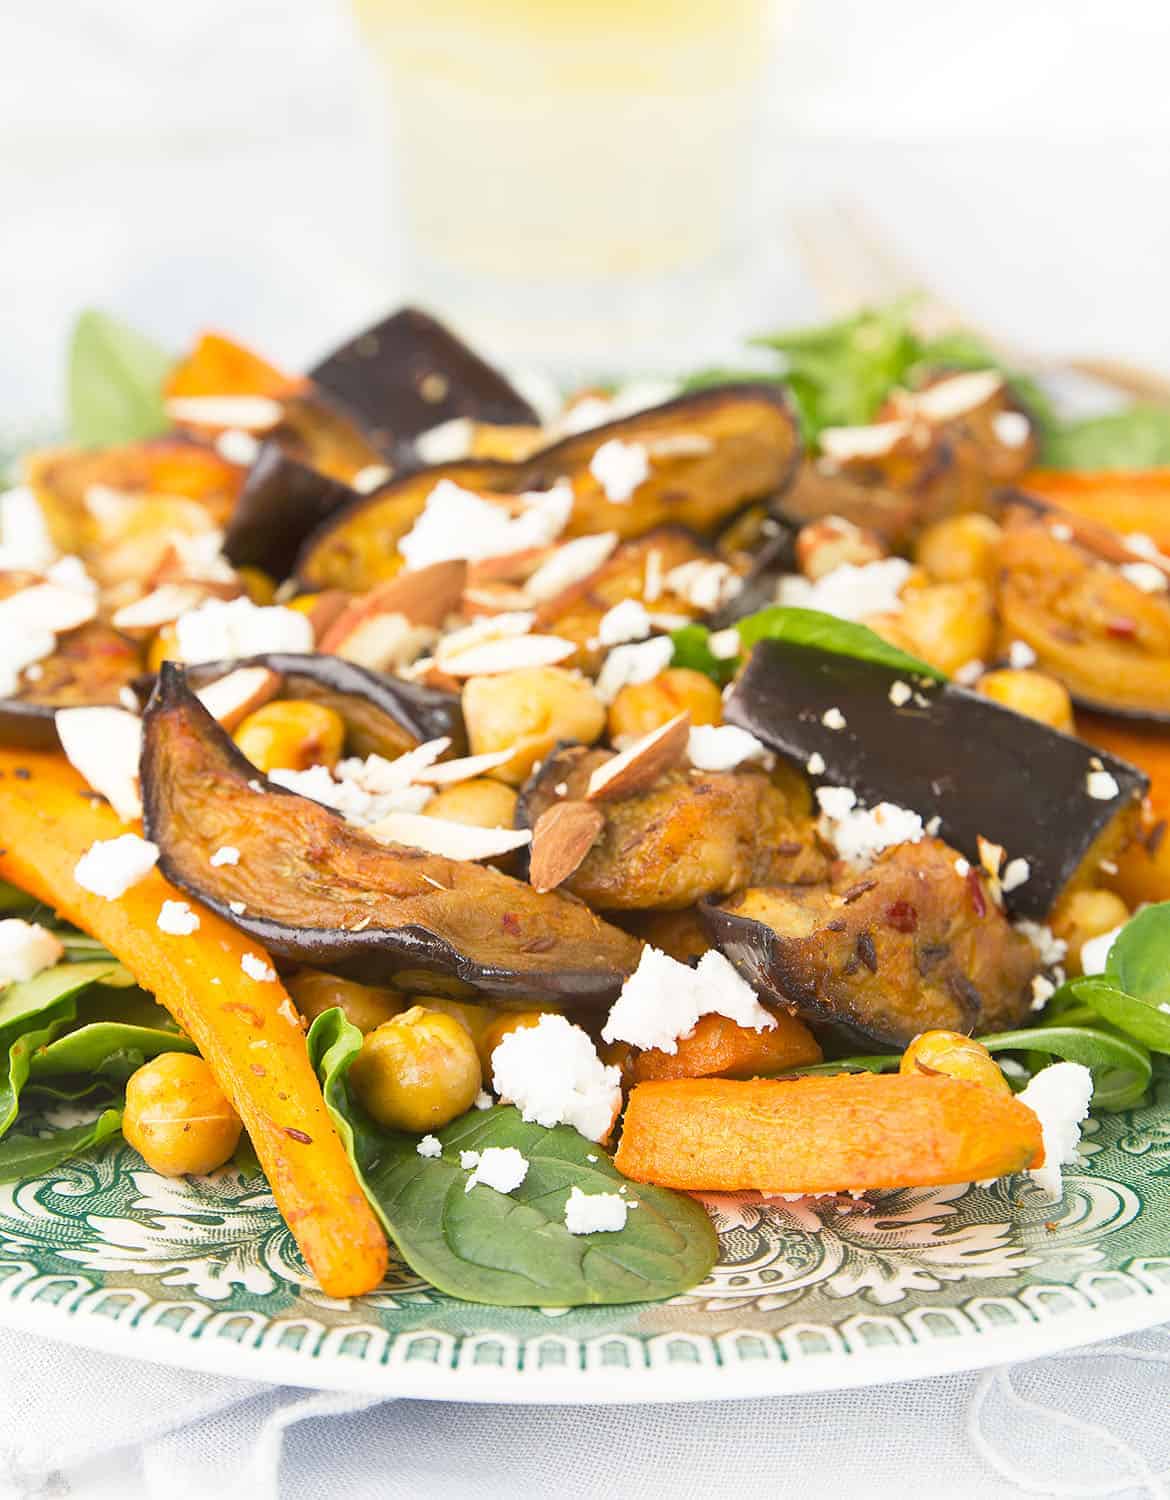 Close-up of harissa eggplant and carrot salad with feta and almond slices.